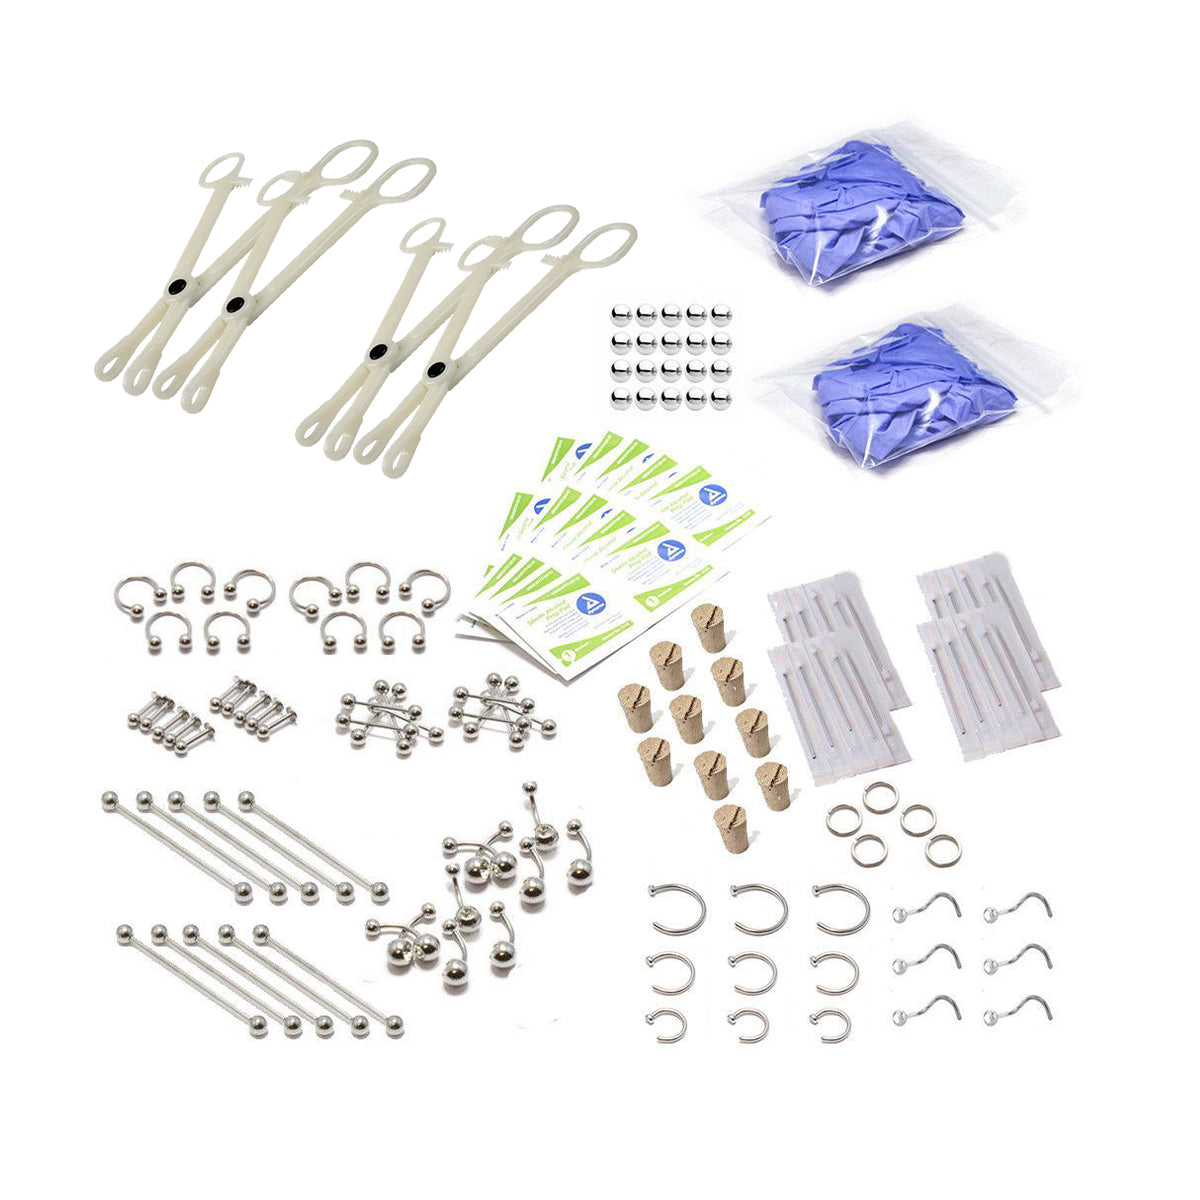 LionGothic 160pc. professional piercing kit with Surgical Steel Body Jewelry